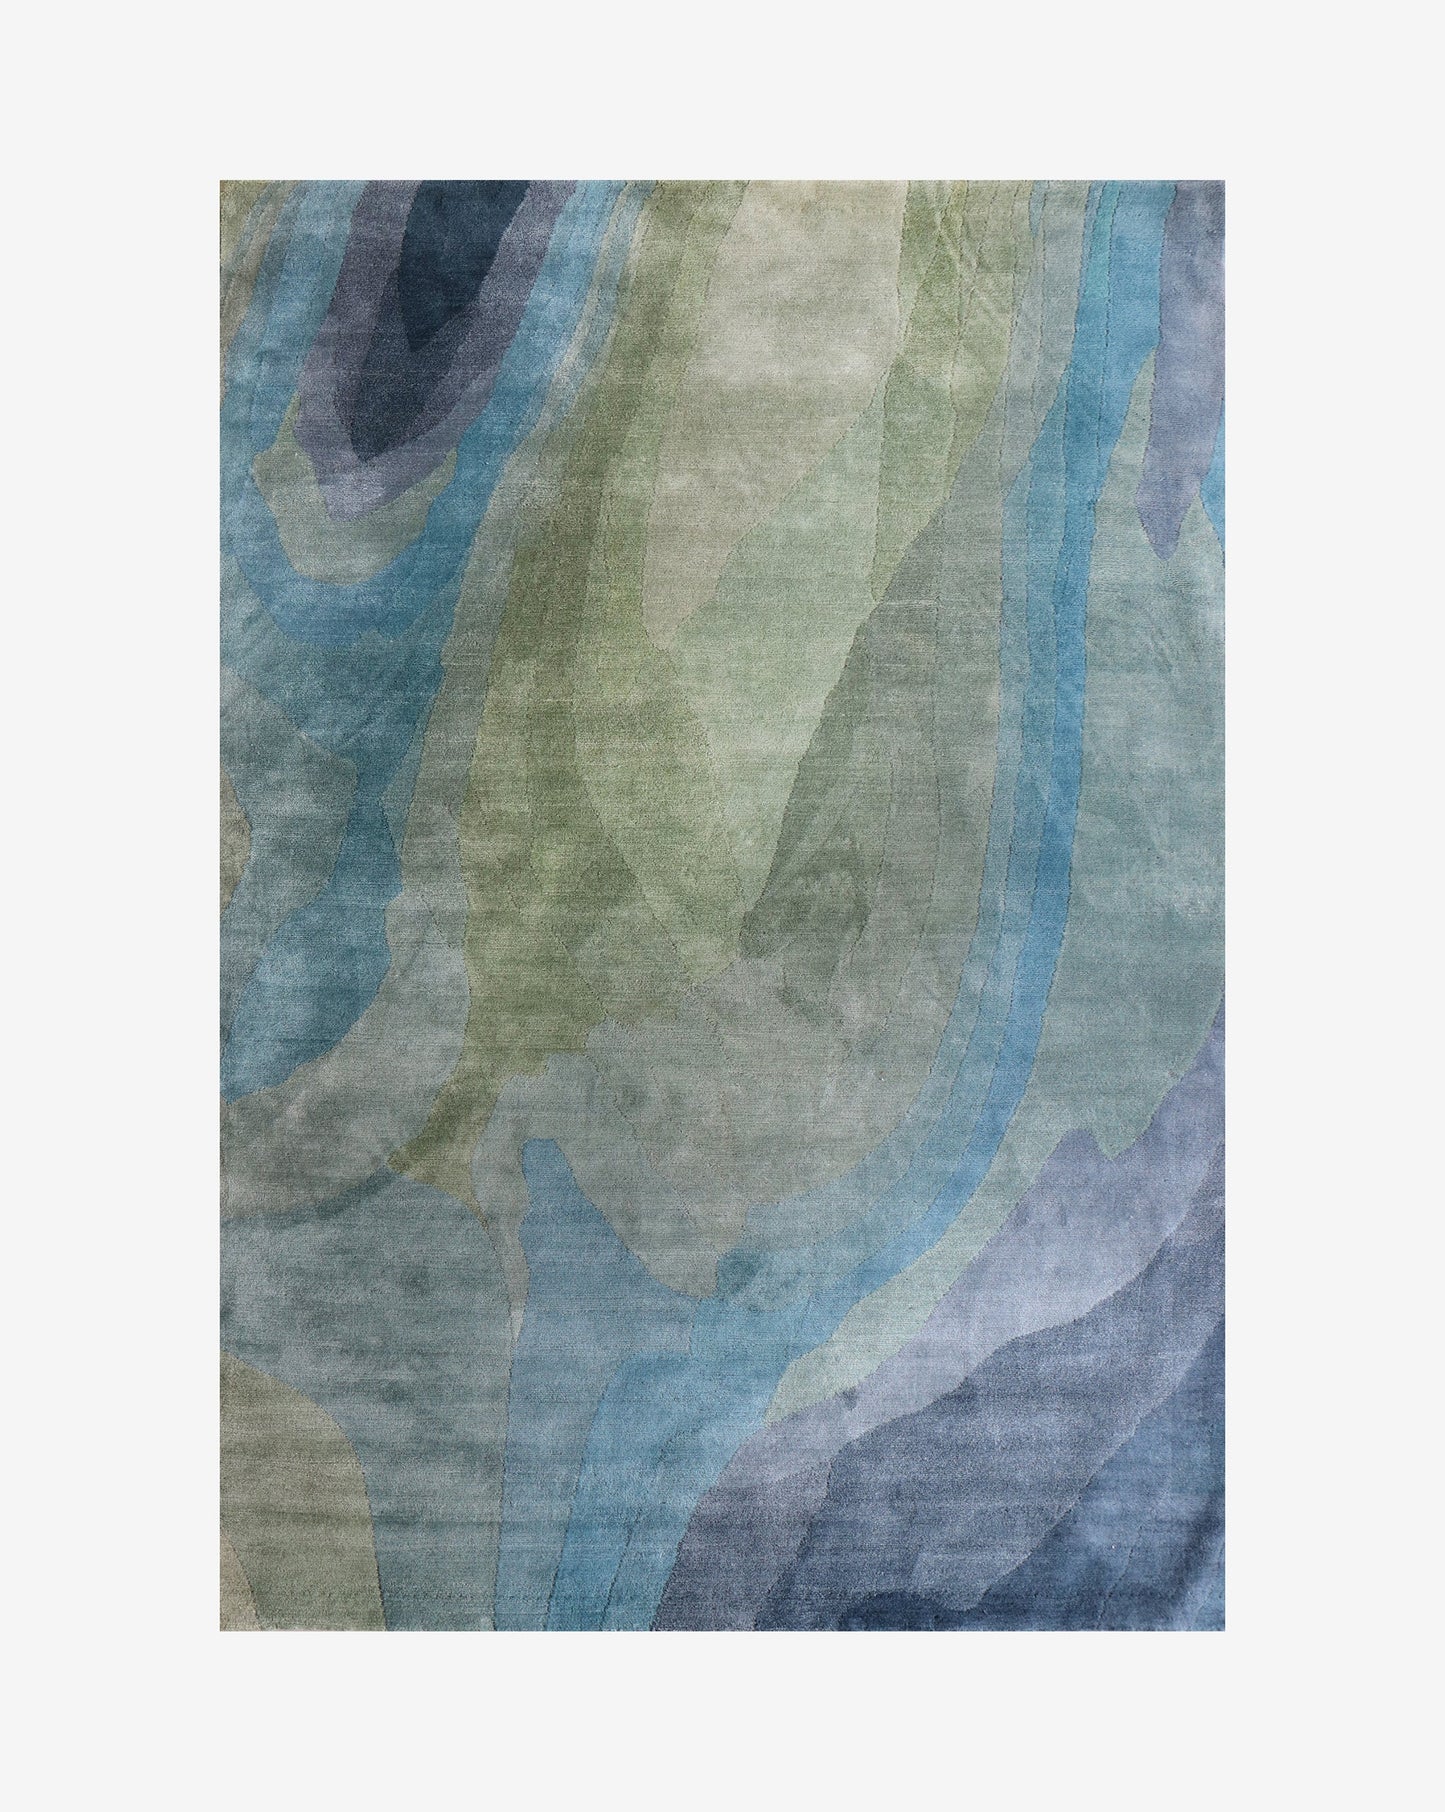 A Progressions Hand Knotted Rug 5' x 8' in the Thalassa colorway, showcasing the chromatic beauty of nature with a wave pattern.